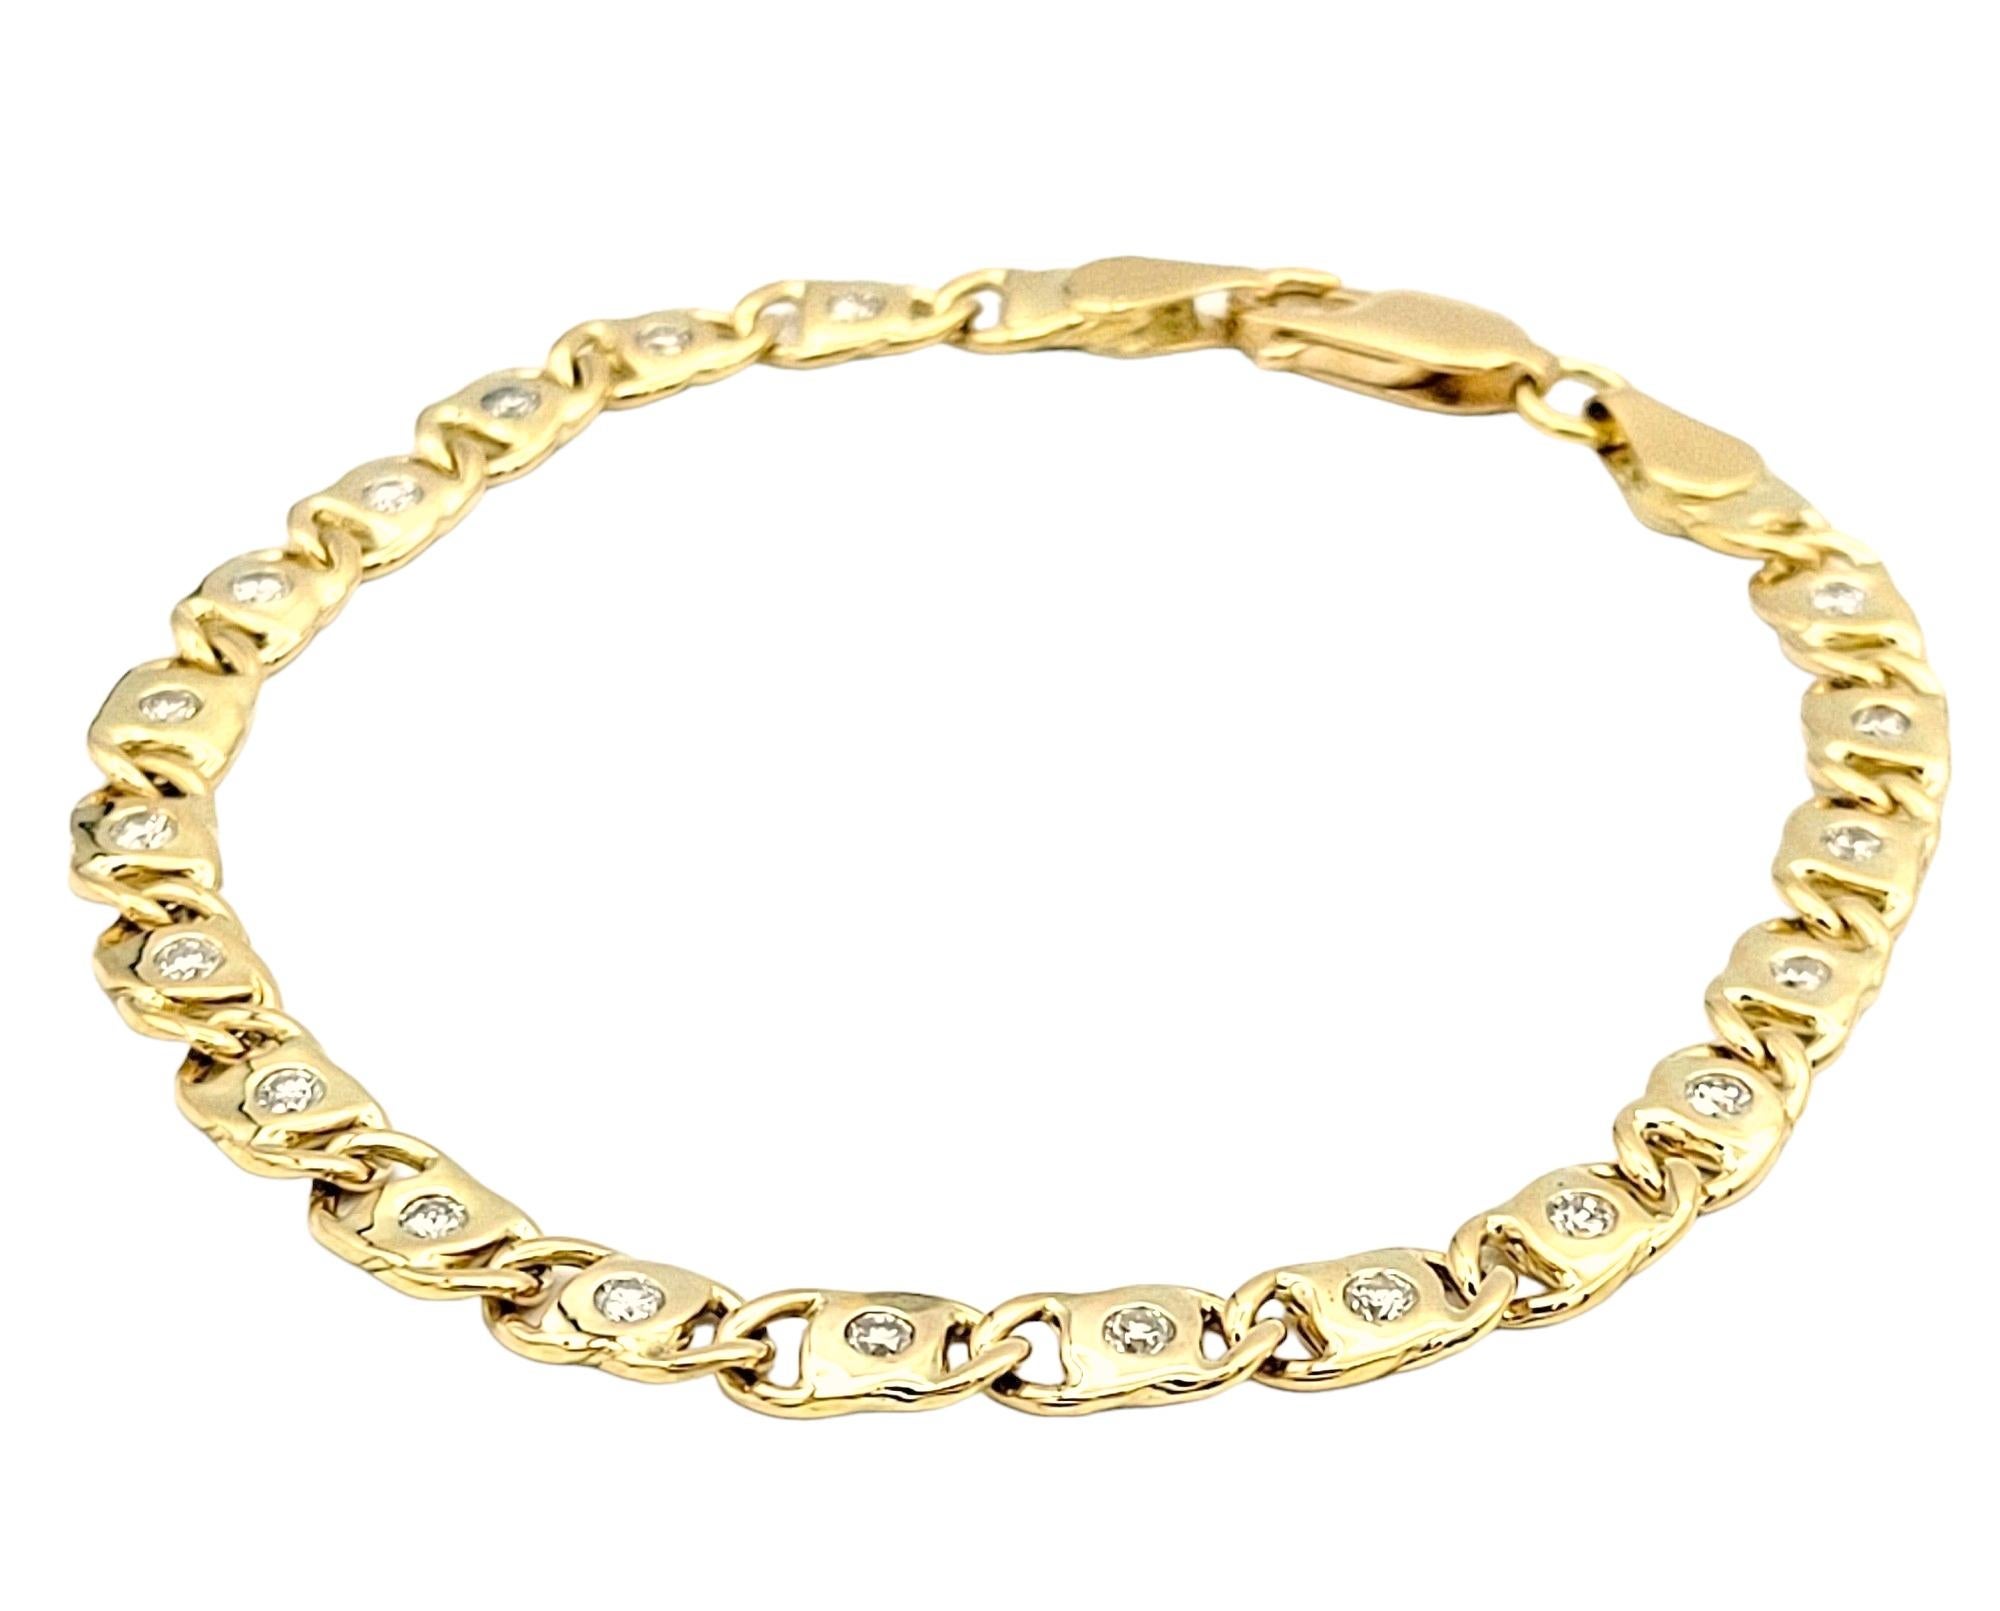 Length: 7.5 Inches

Shown here is a gorgeous 18 karat yellow gold anchor link chain bracelet adorned with 1.00 carat of natural round diamonds. This captivating piece seamlessly blends elegance and style, offering a luxurious accessory for any